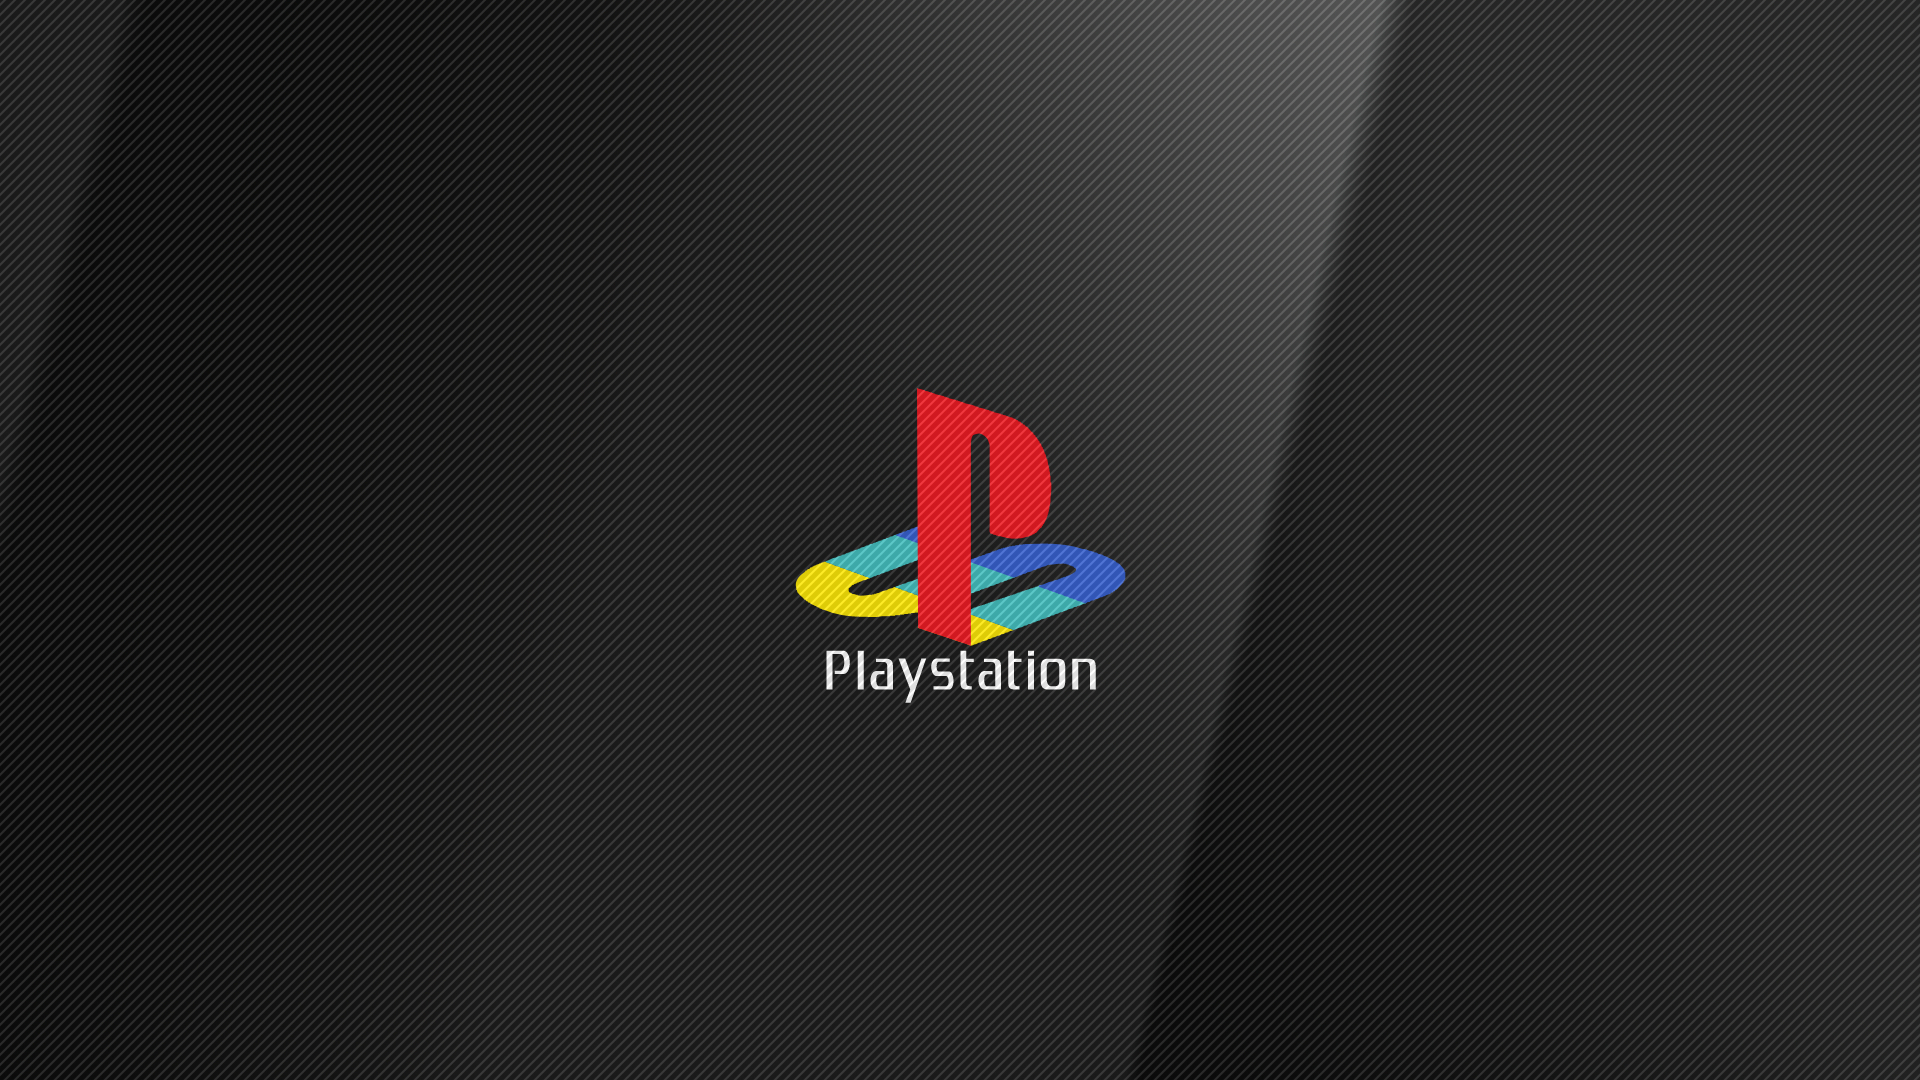 The Below Image Is Sony Playstation Logo Wallpaper